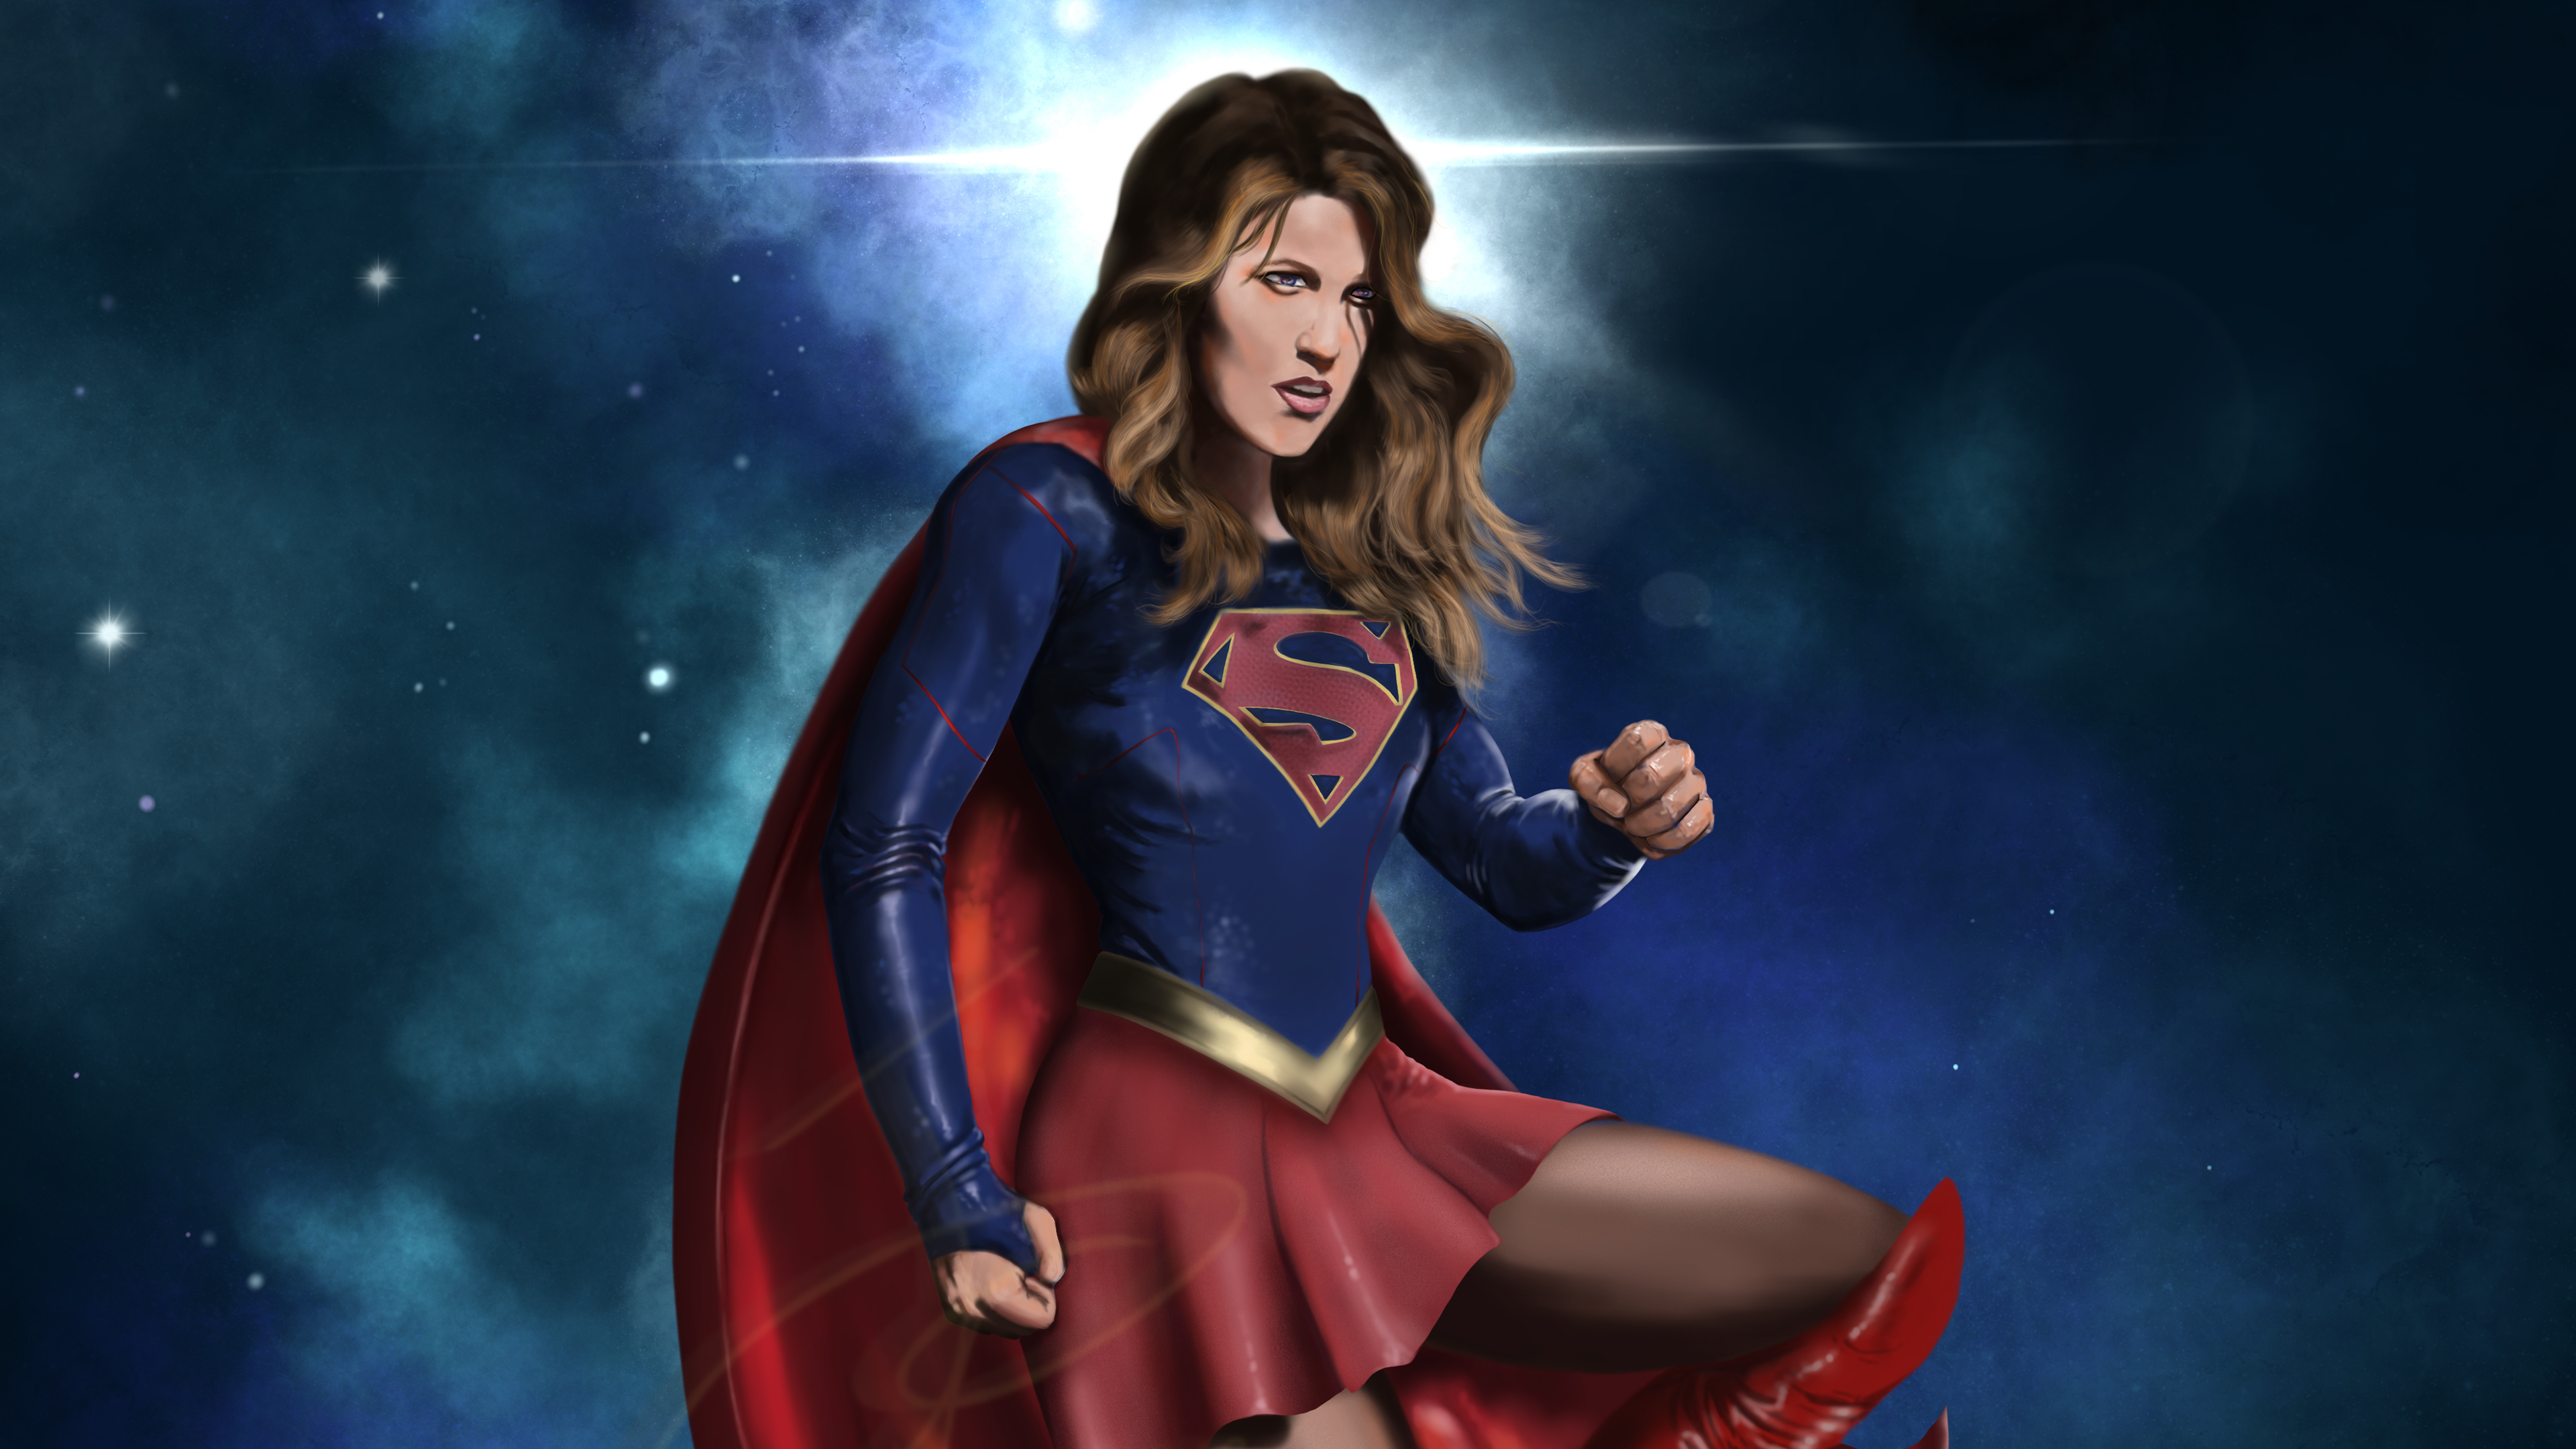 4k Supergirl New Hd Superheroes 4k Wallpapers Images Backgrounds Photos And Pictures